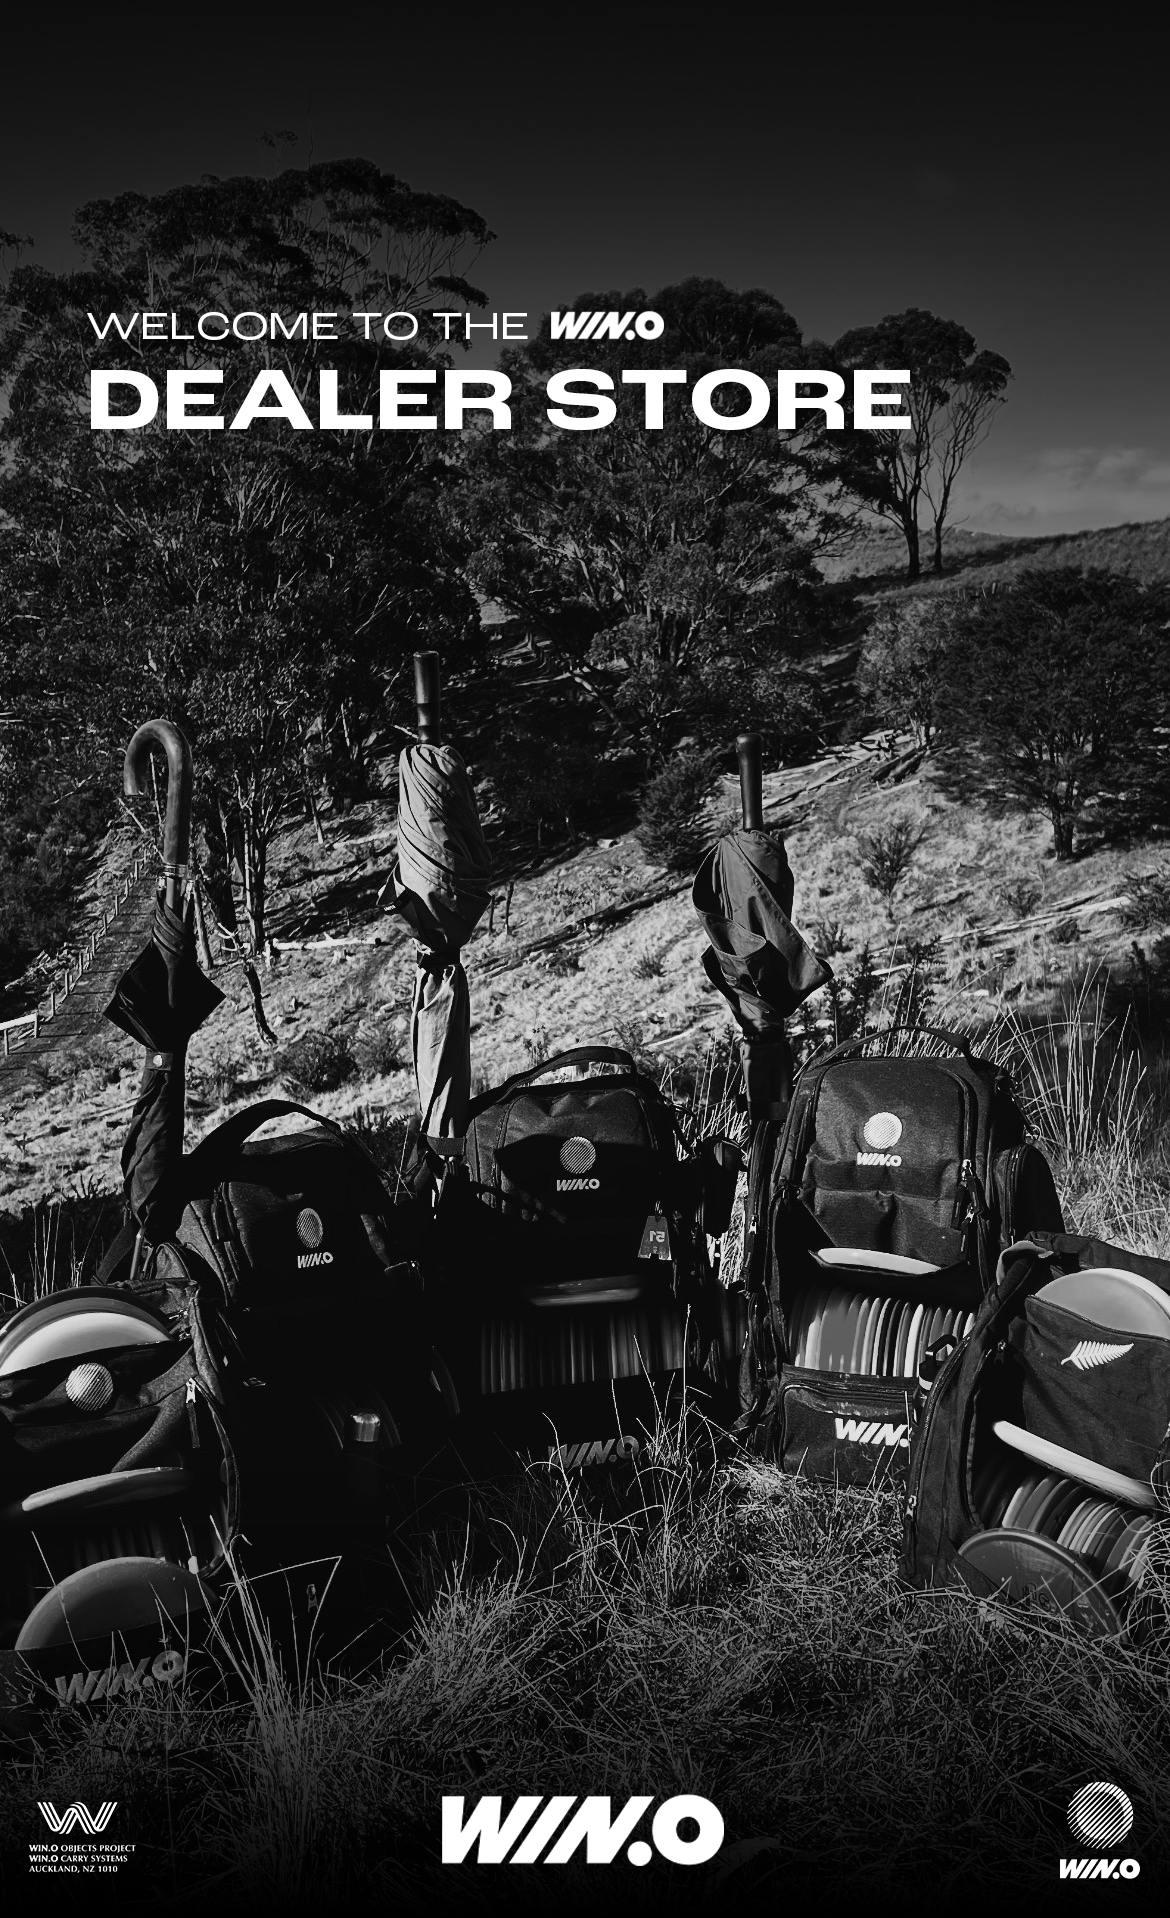 Welcome to the Dealer Store